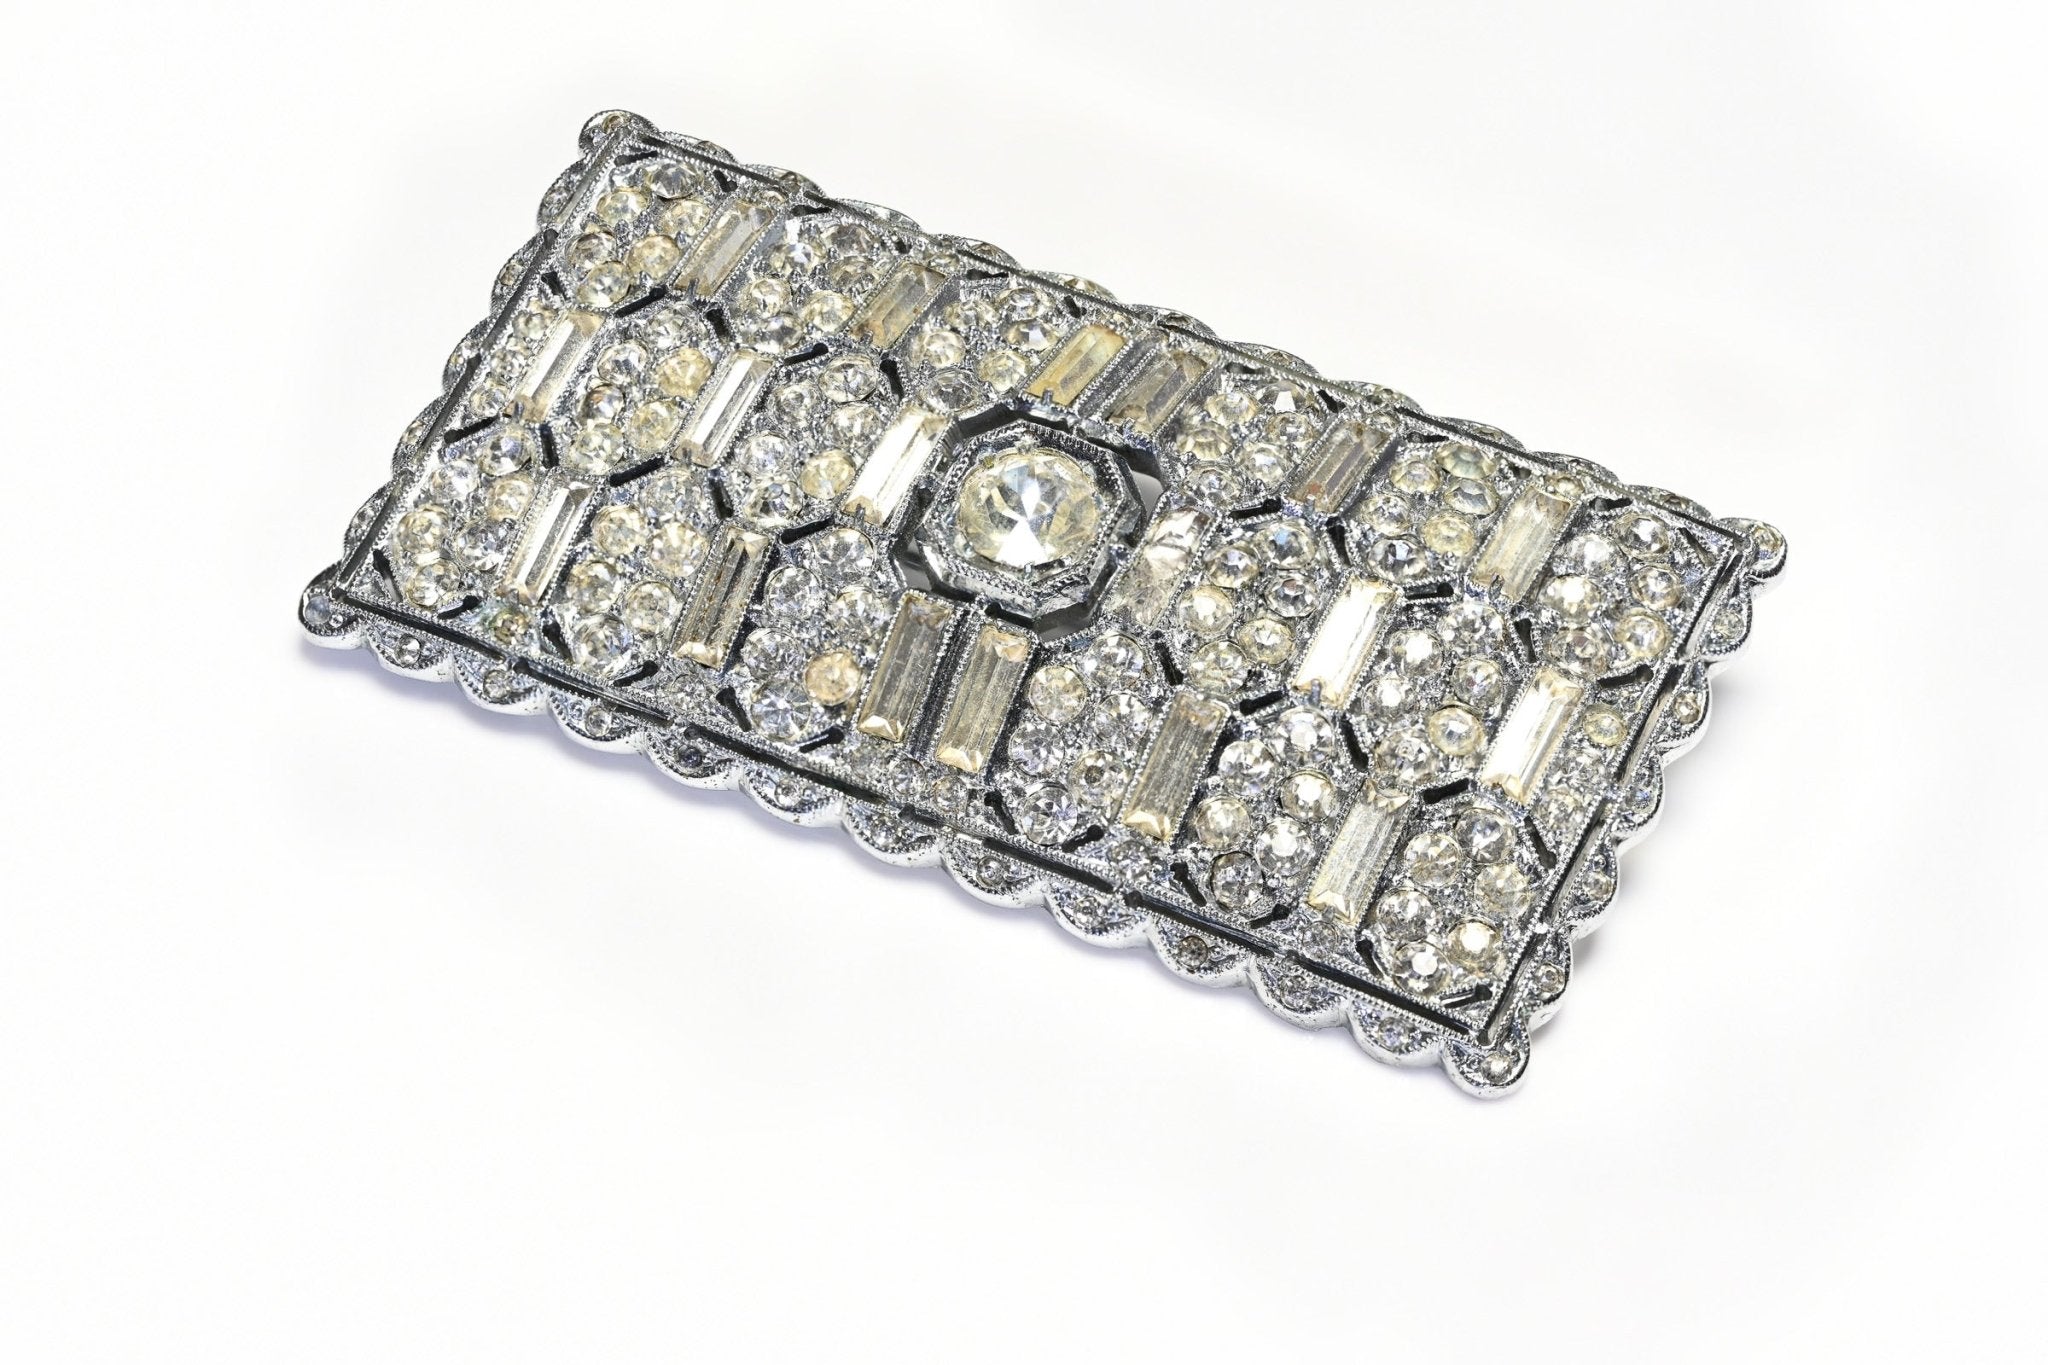 Vintage 1950's Czech Rhodium Plated Art Deco Style Crystal Brooch